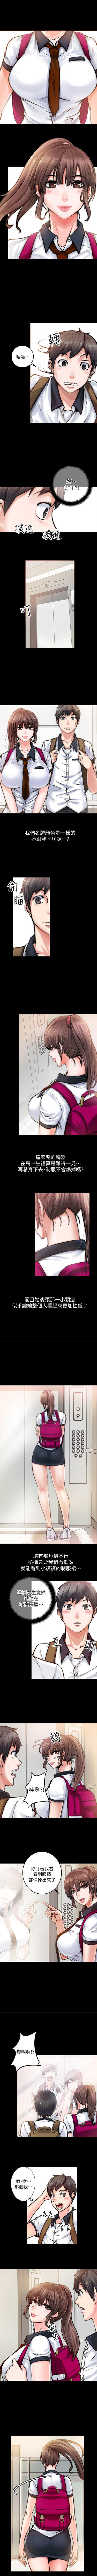 Sex Party 觸不到的她 1-39 Morocha - Page 2